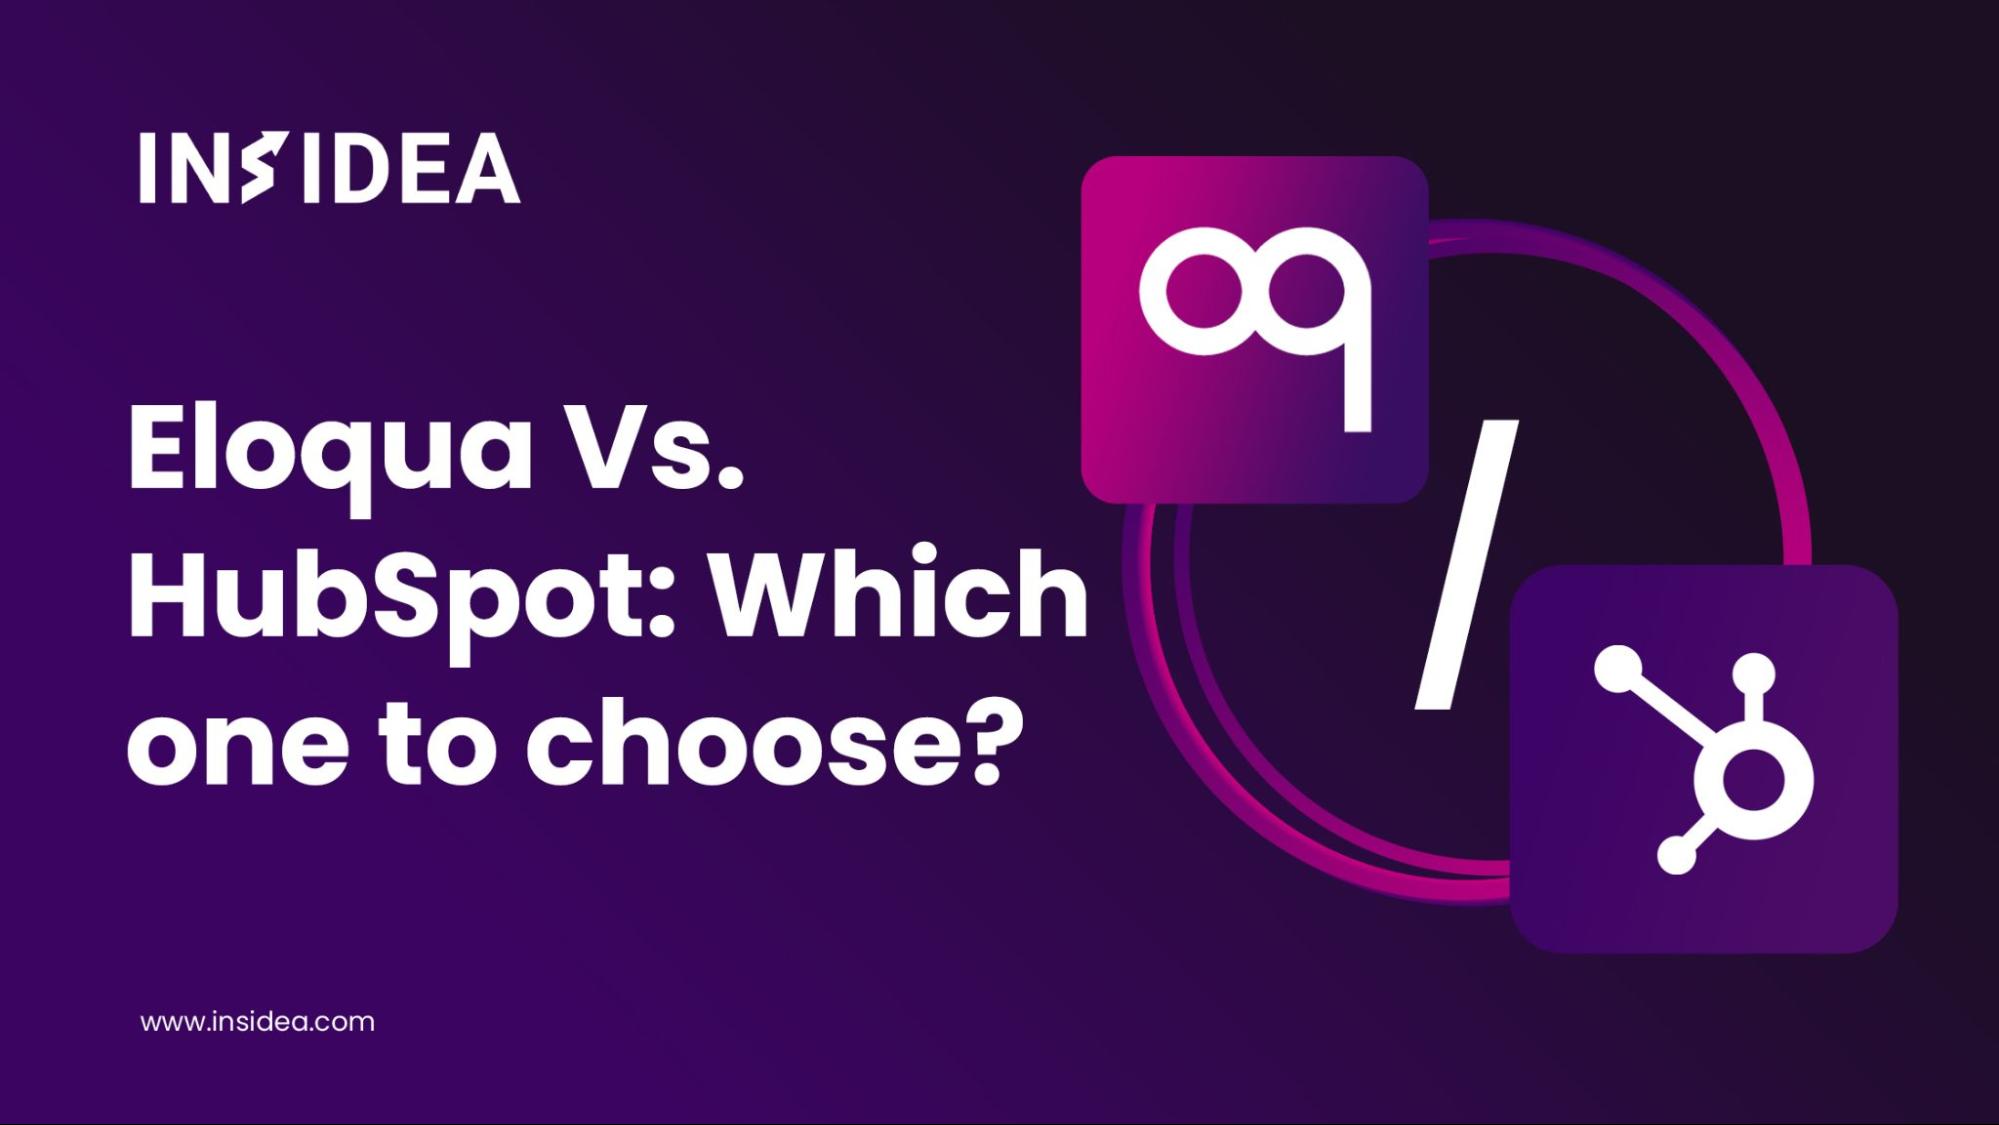 Eloqua Vs. HubSpot: Which one to choose?